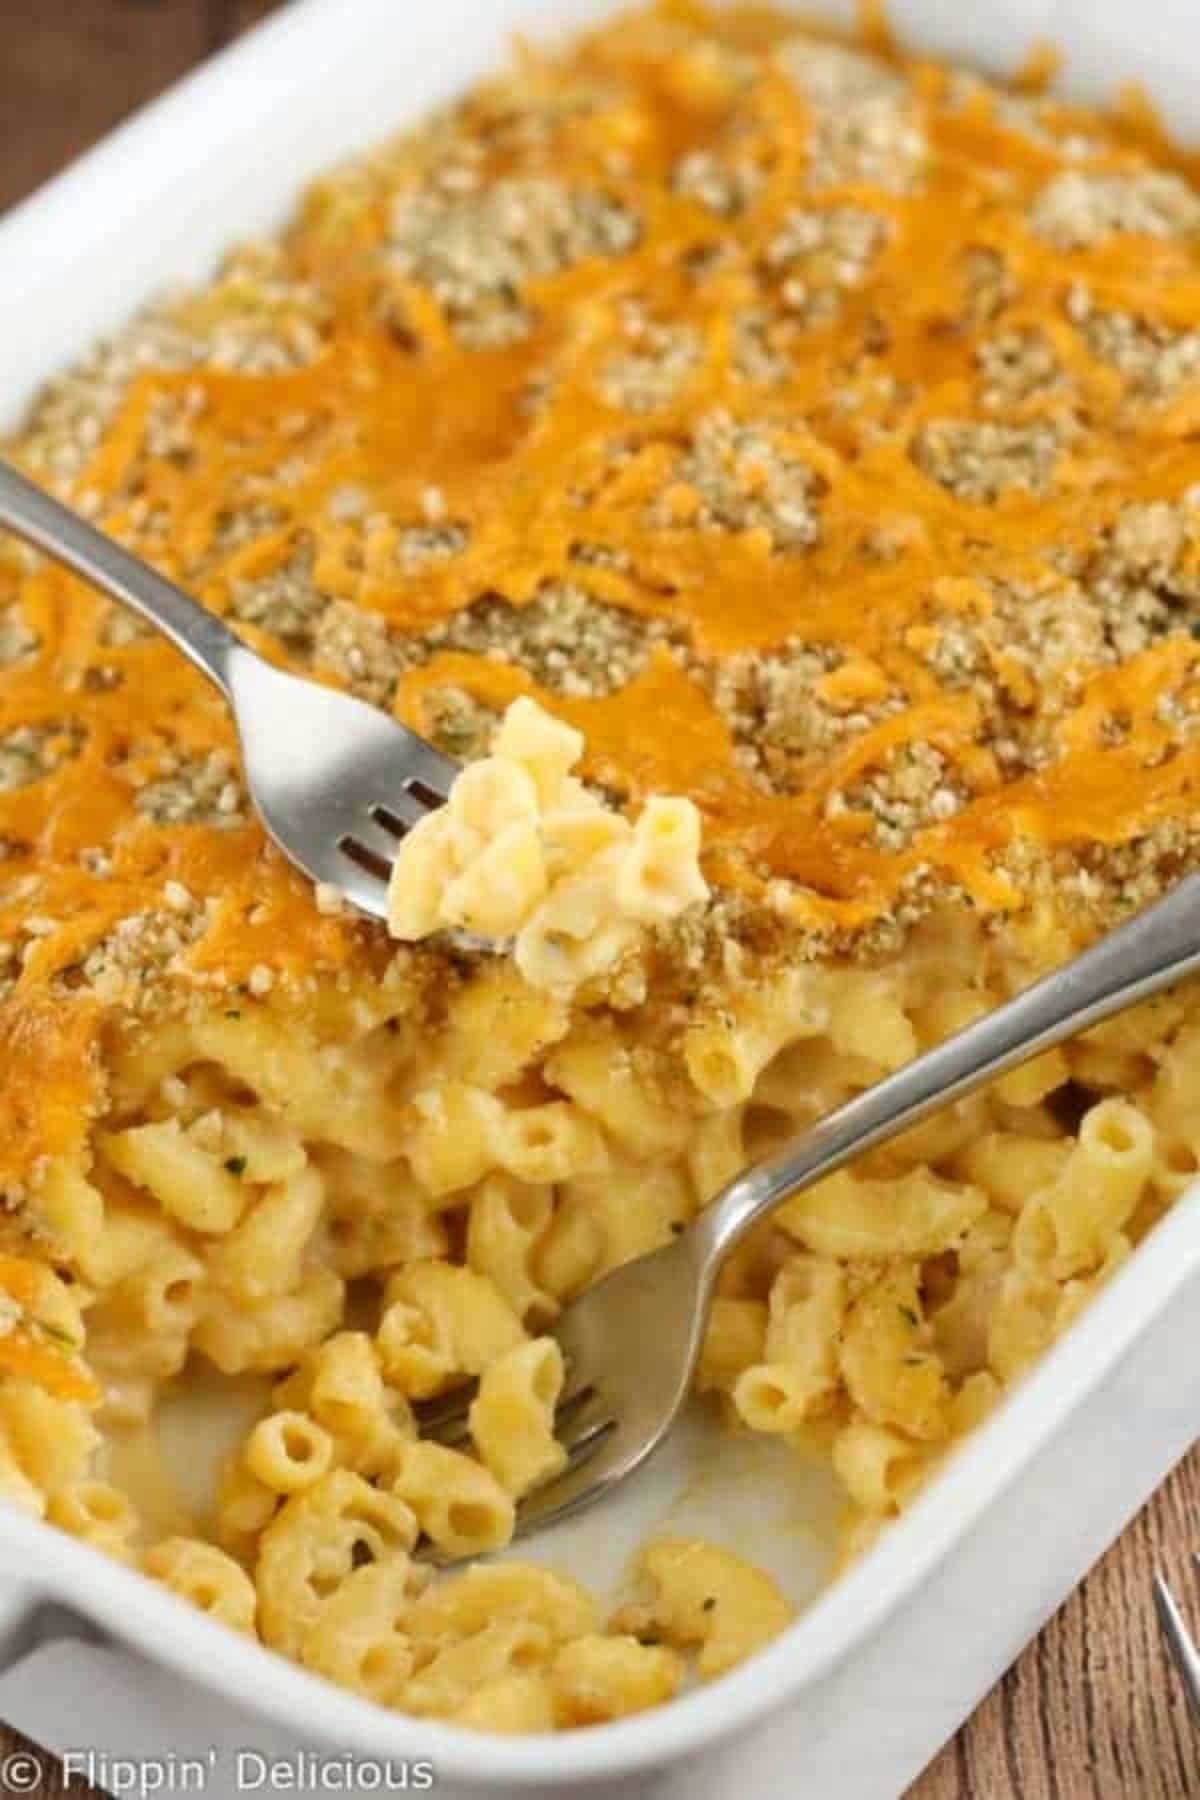 Delicious Baked Gluten-Free Mac and Cheese in a white casserole with two forks.